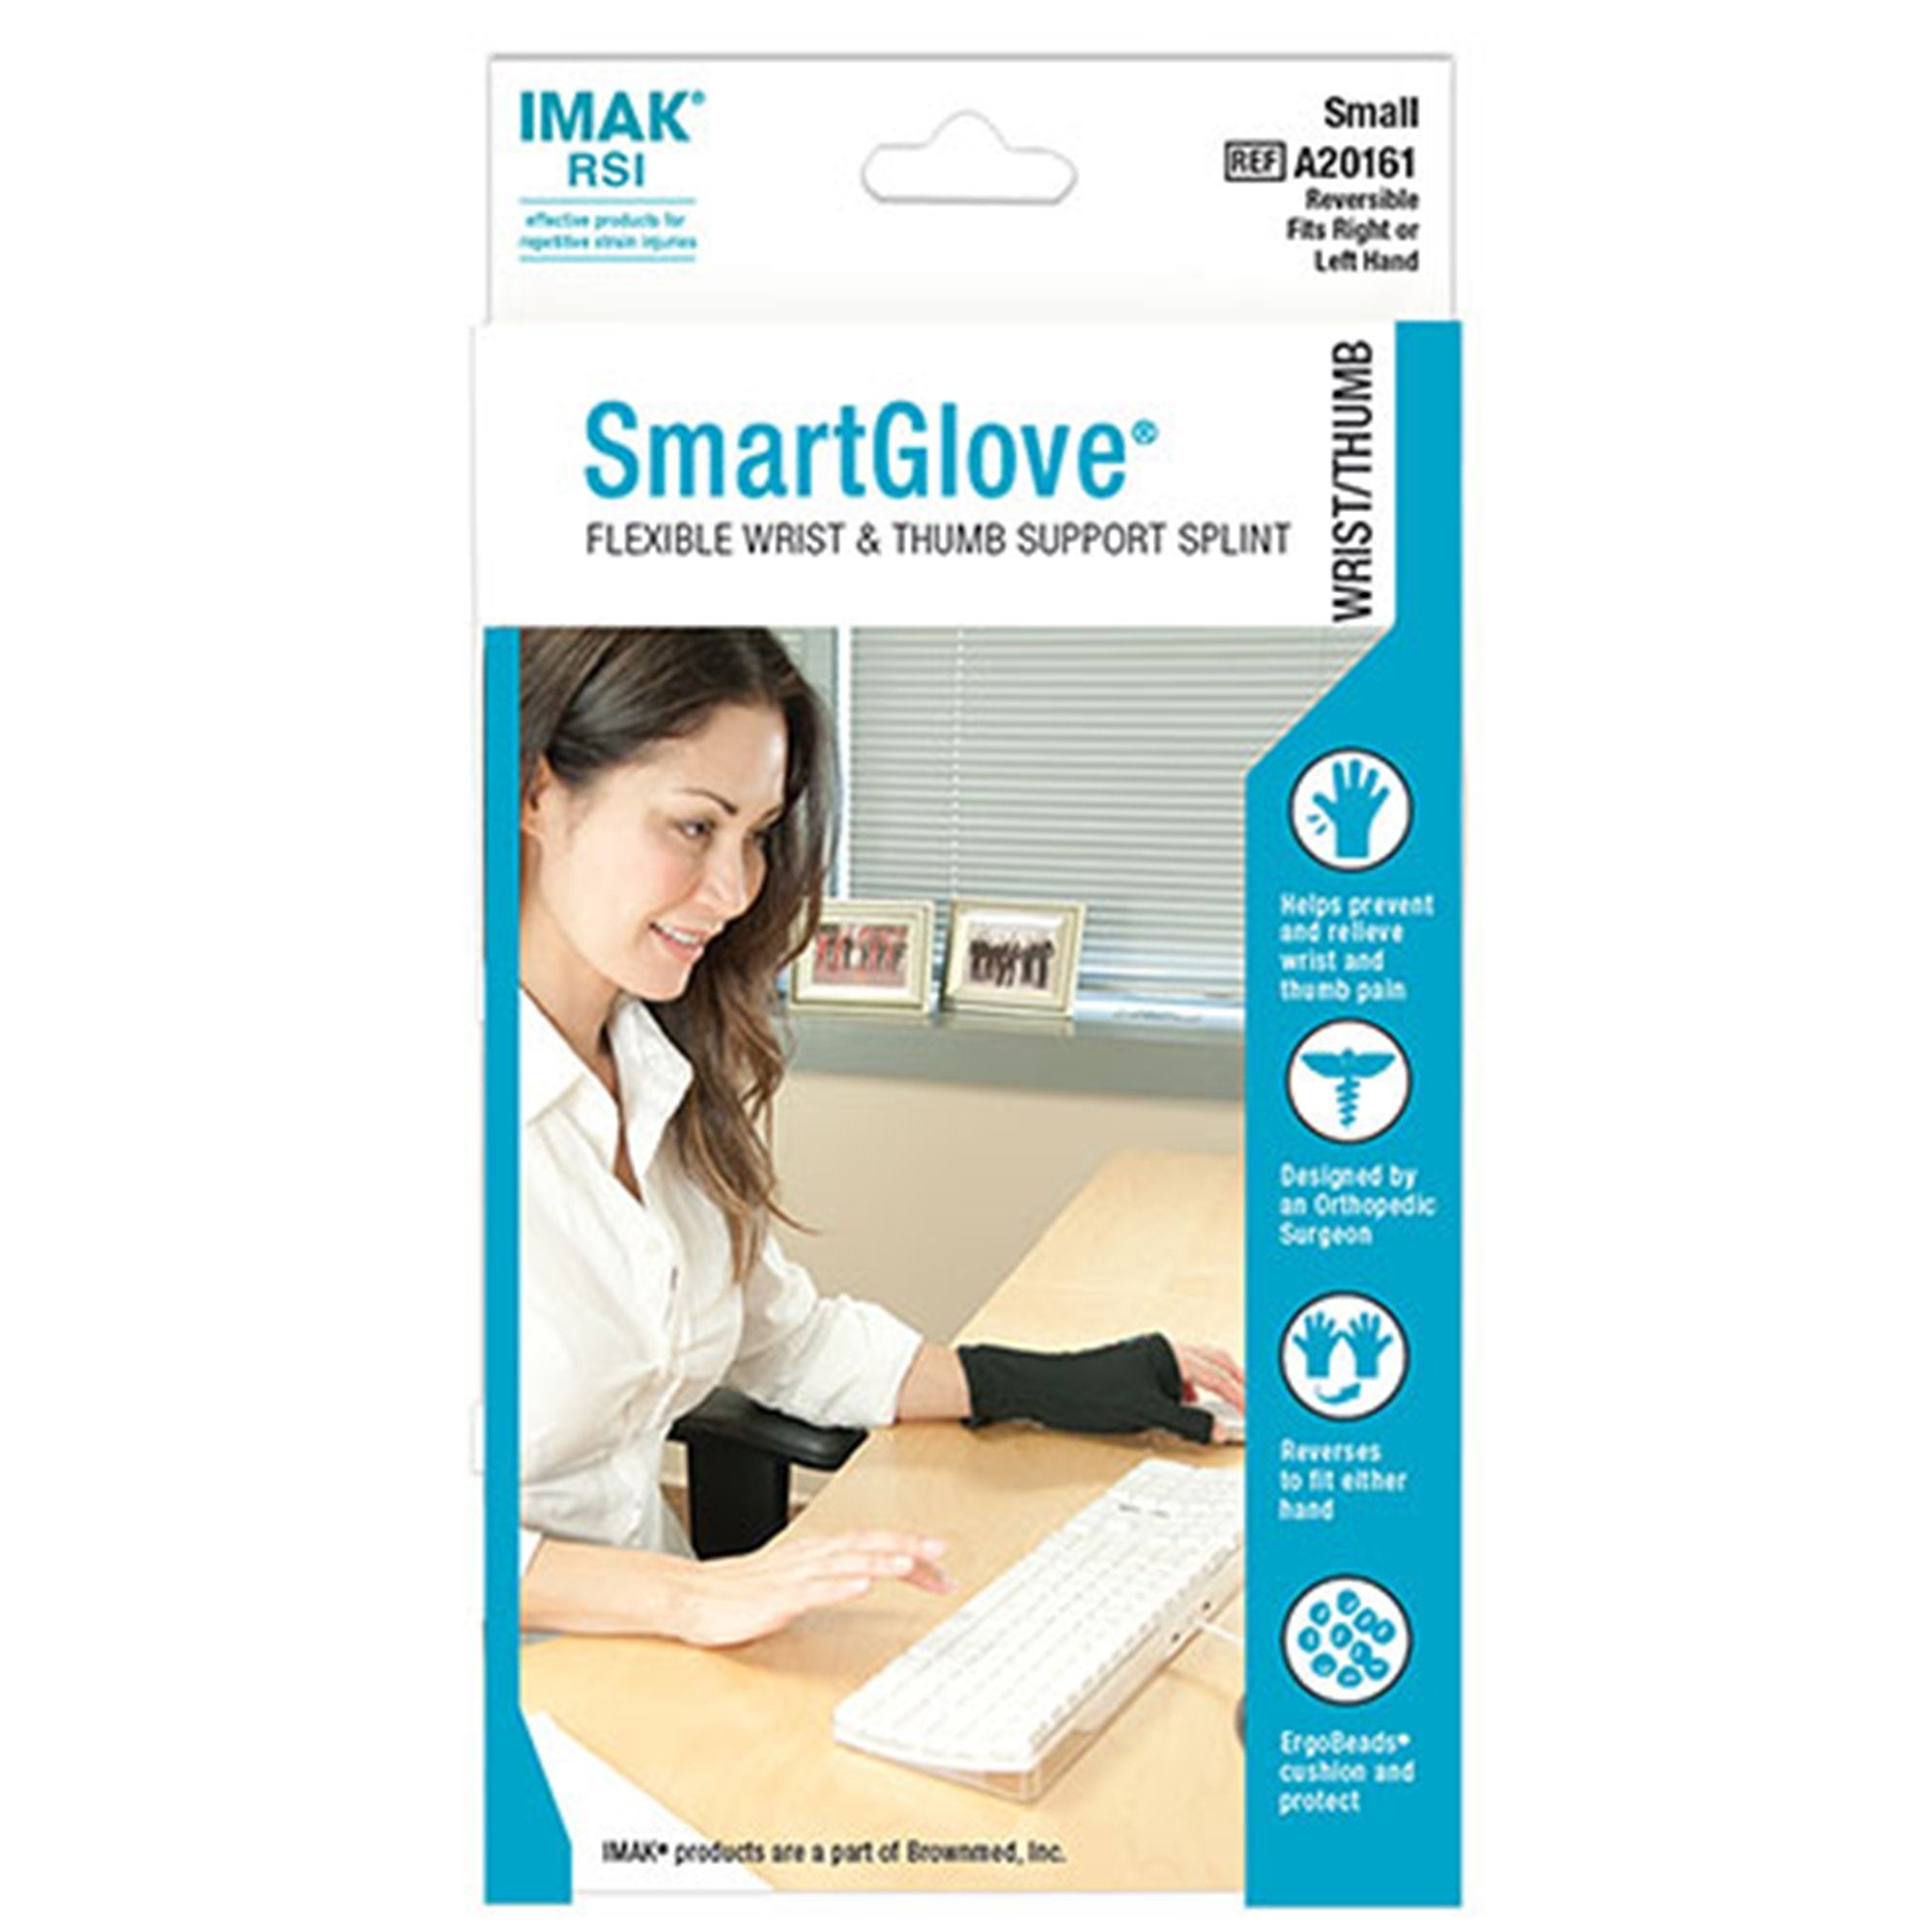 Support Gloves with Thumb Extension IMAK® RSI SmartGlove Fingerless Large Over-the-Wrist Length Ambidextrous Cotton / Lycra®